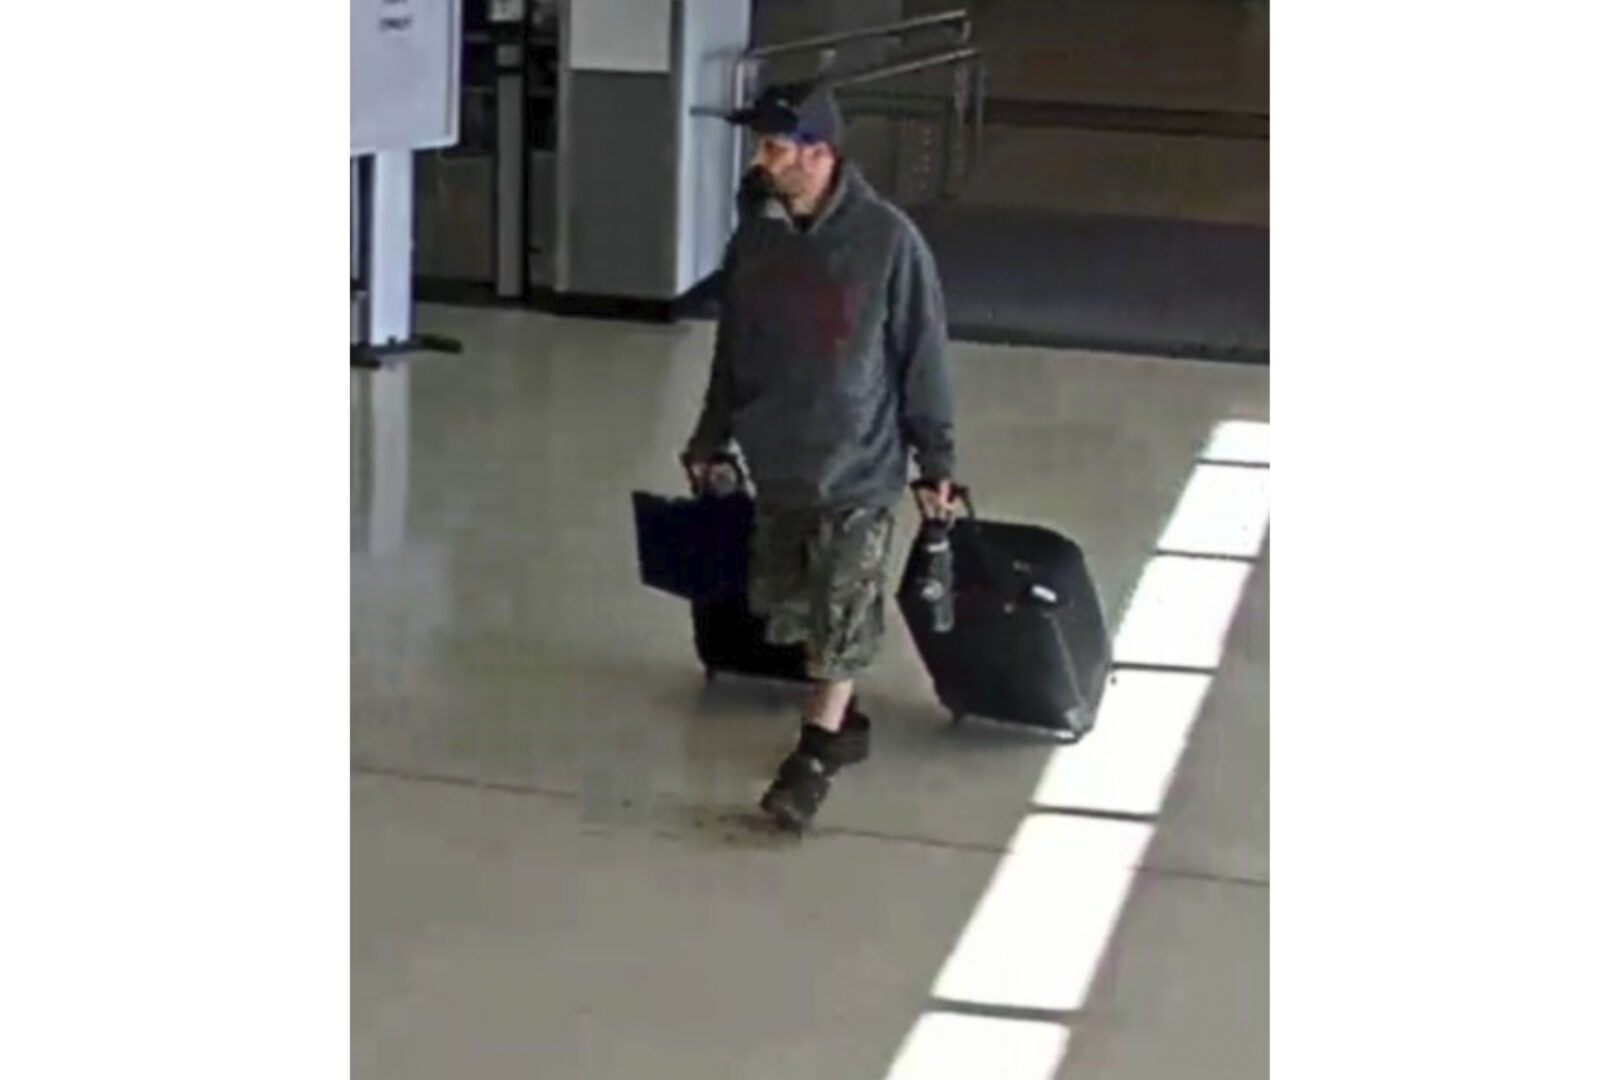 This airport surveillance camera image released in an FBI affidavit shows alleged suspect Marc Muffley at Lehigh Valley International Airport in Allenstown, Pa., on Monday, Feb. 27, 2023. Muffley was arrested Monday after an explosive was found in a bag checked onto a Florida-bound flight, federal authorities said. 